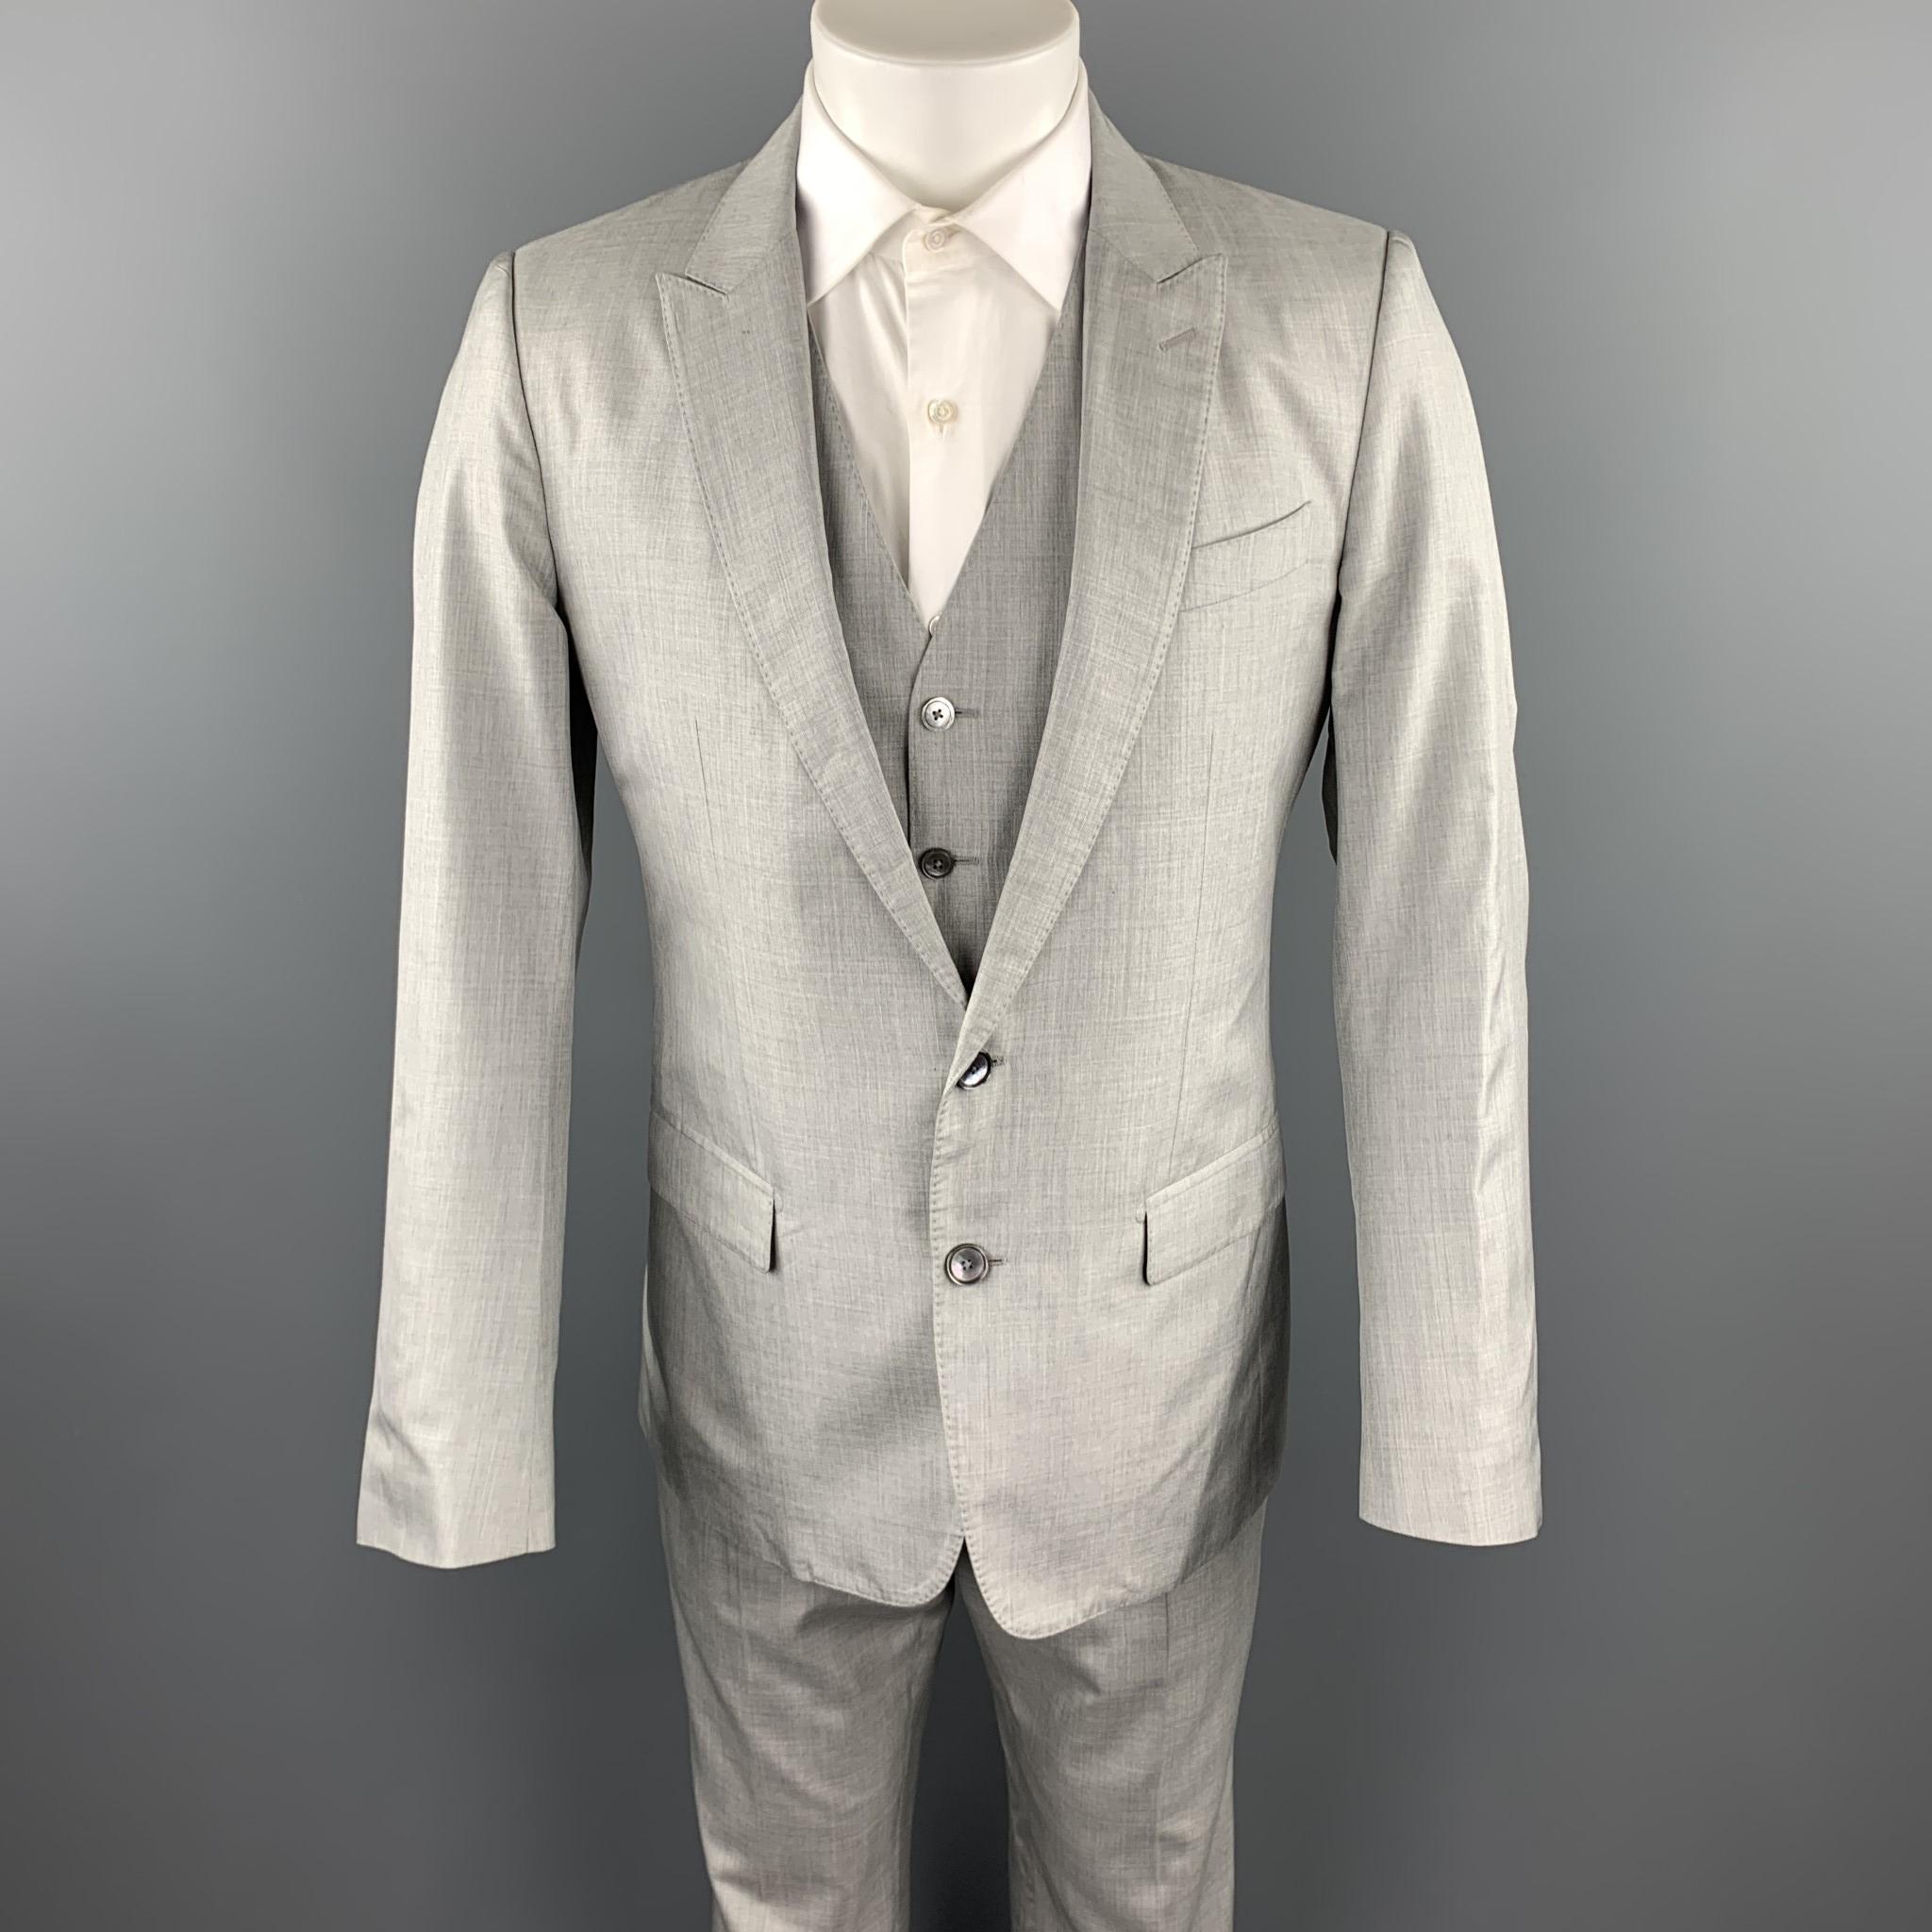 DOLCE & GABBANA suit comes in a light gray silk with a full liner and includes a single breasted, two button sport coat with a peak lapel and matching vest and flat front trousers. 

Excellent Pre-Owned Condition.
Marked: IT